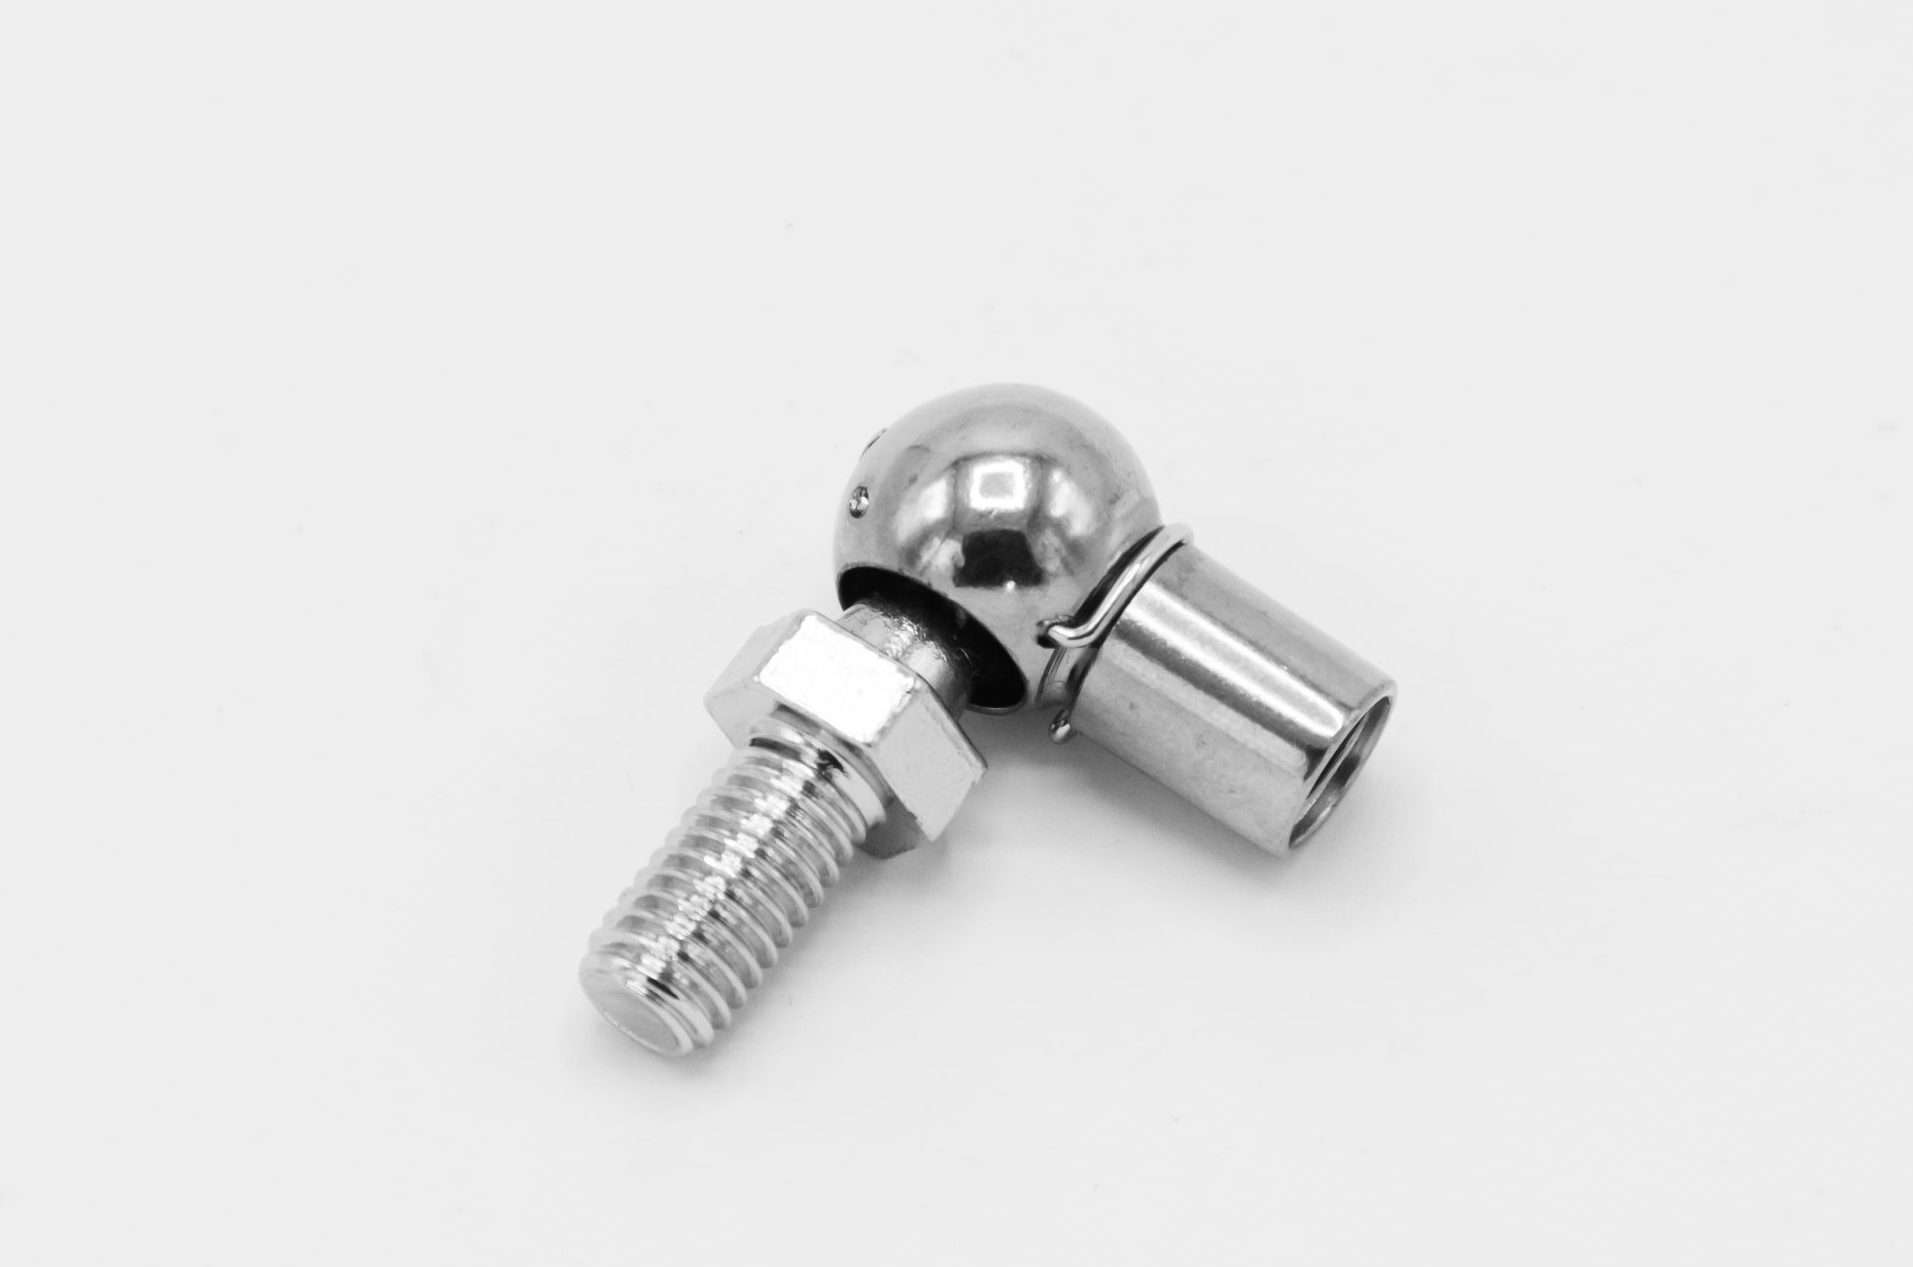 14mm Gas Spring End Fitting